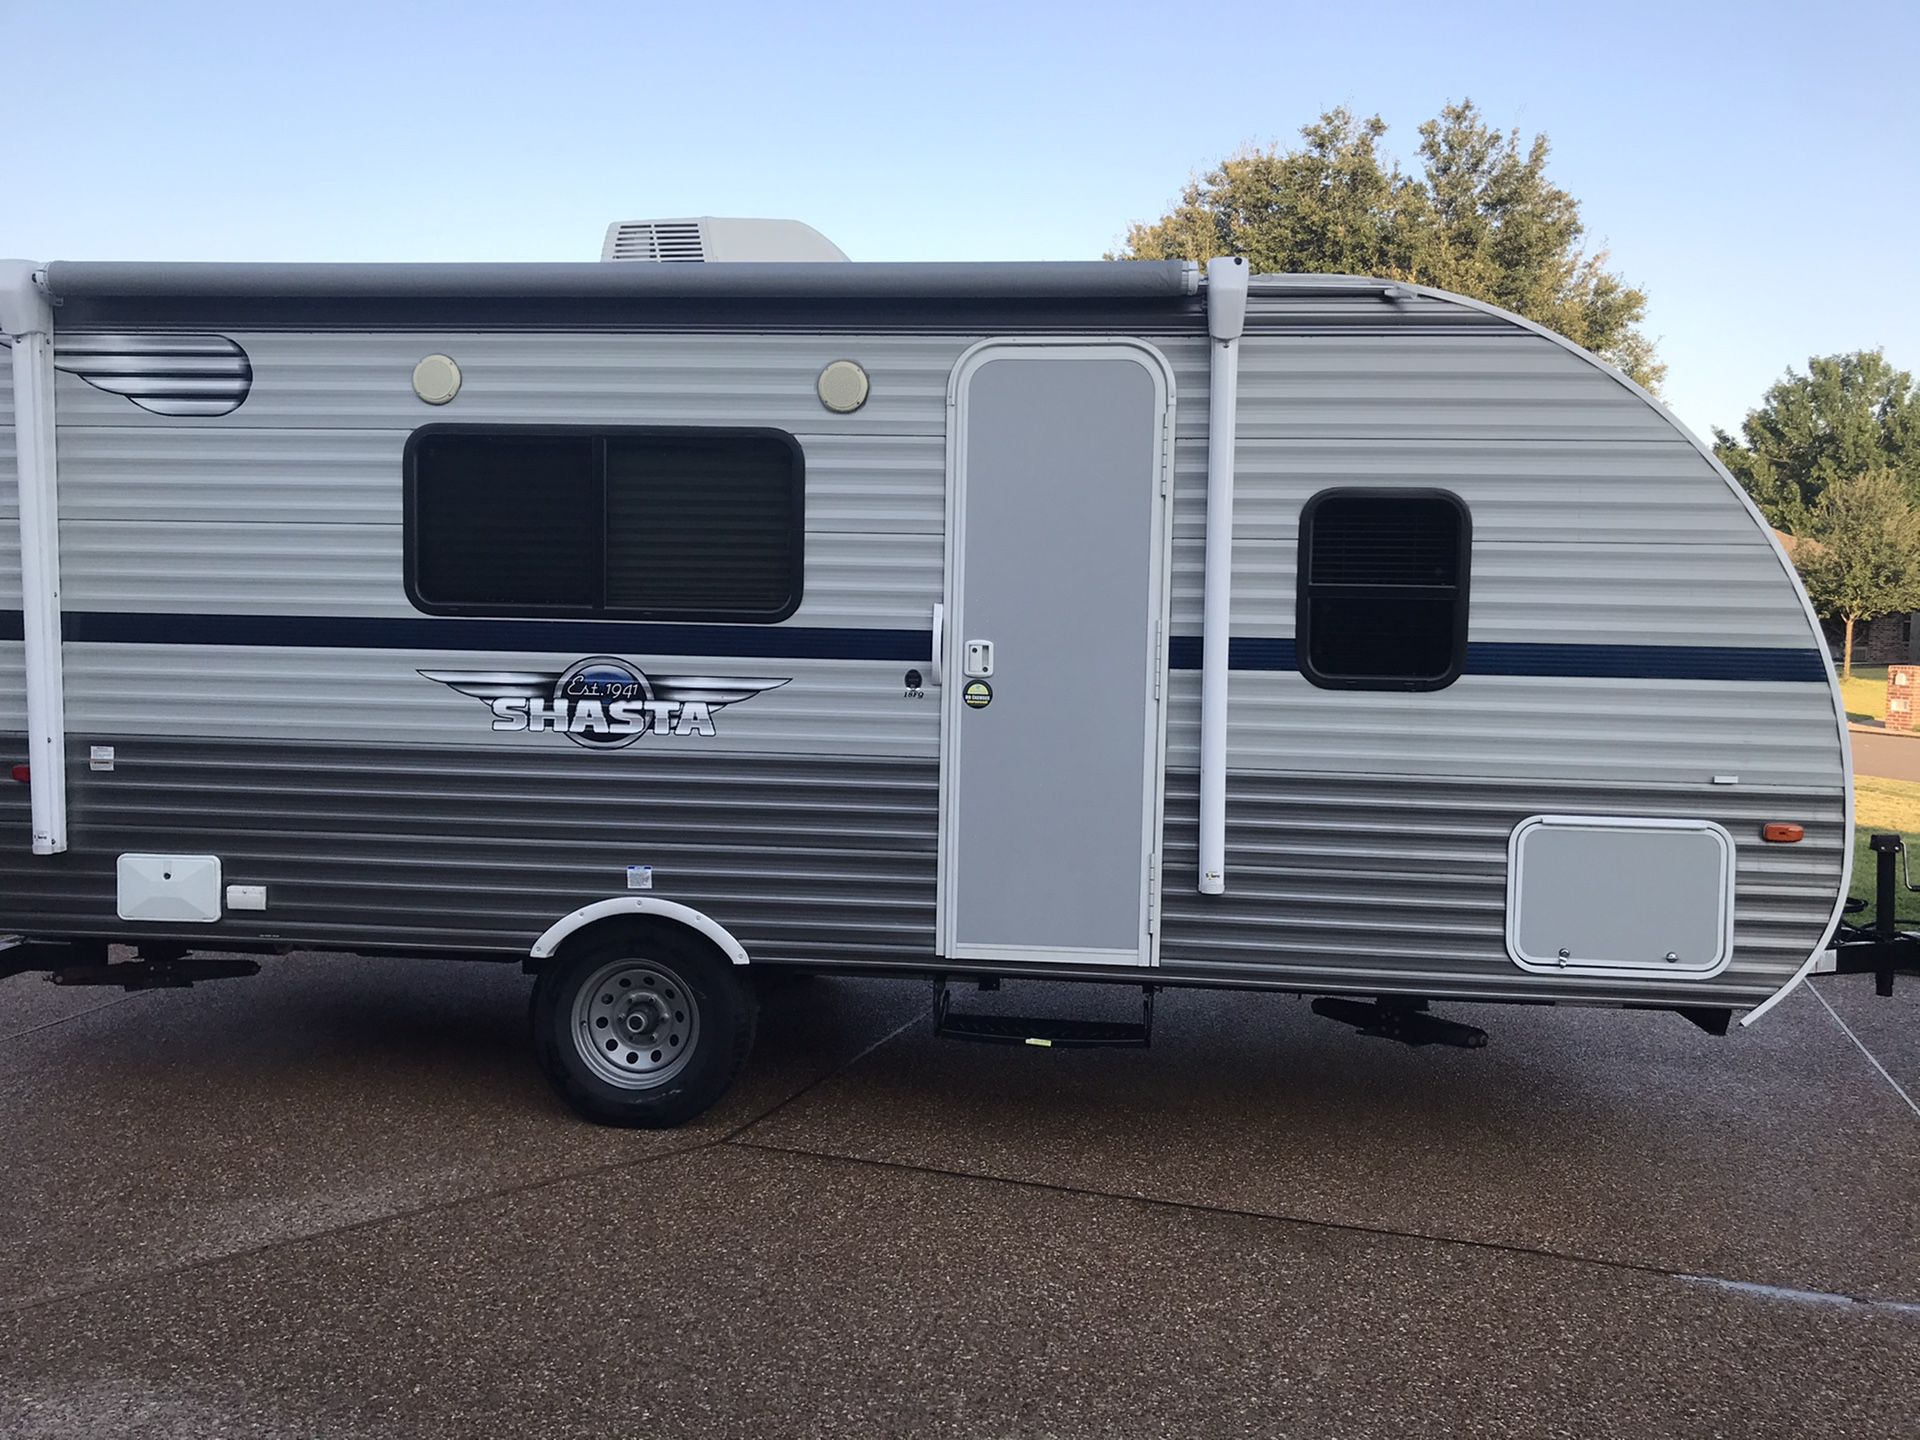 2019 Shasta Oasis 18FQ; 22 feet overall length; 3200 lbs dry weight